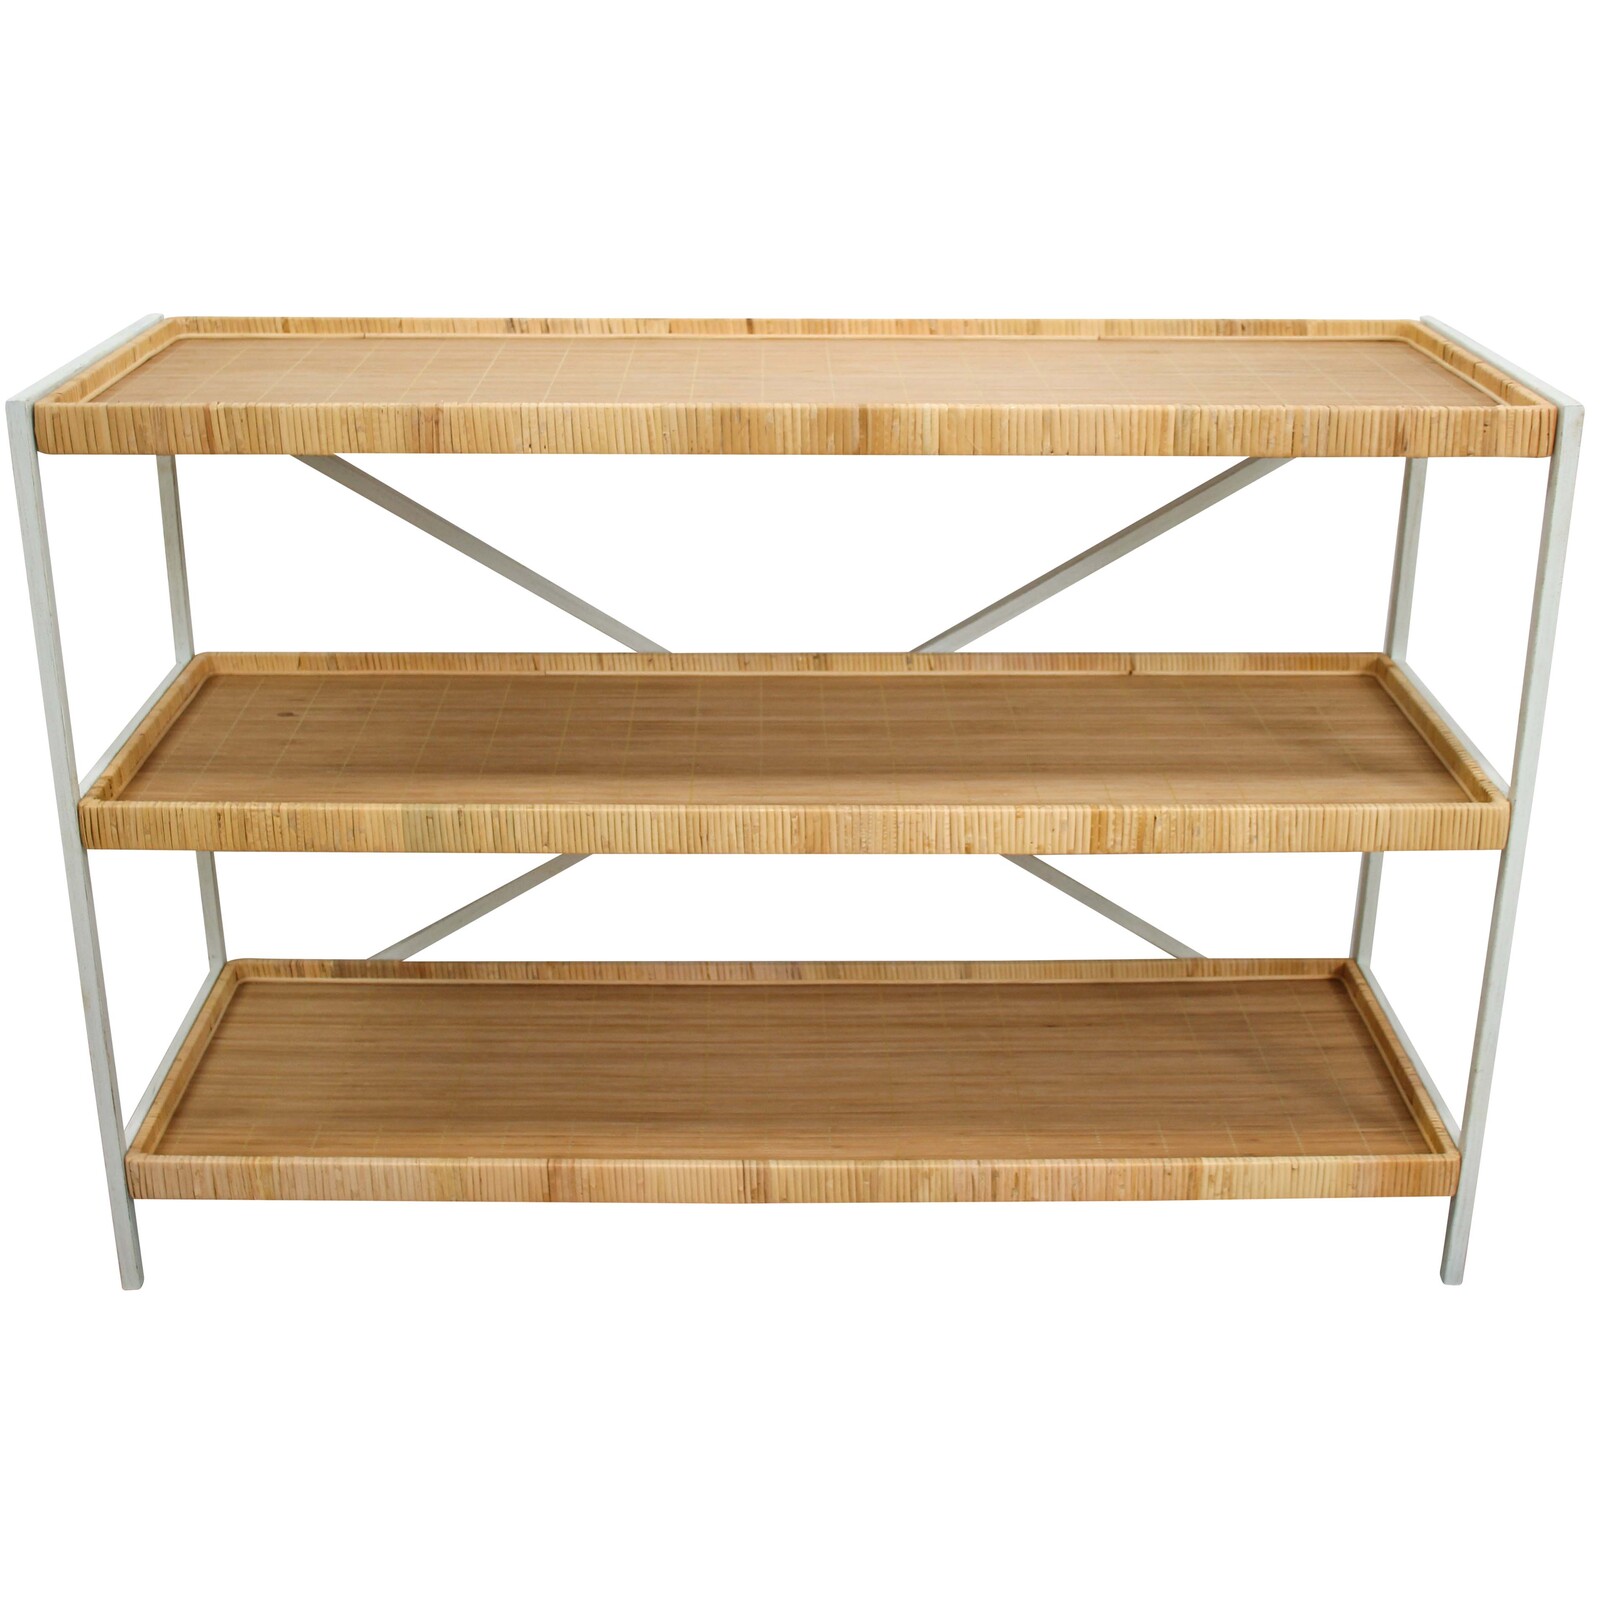 Harbour Cane & Metal Console Table With Shelves